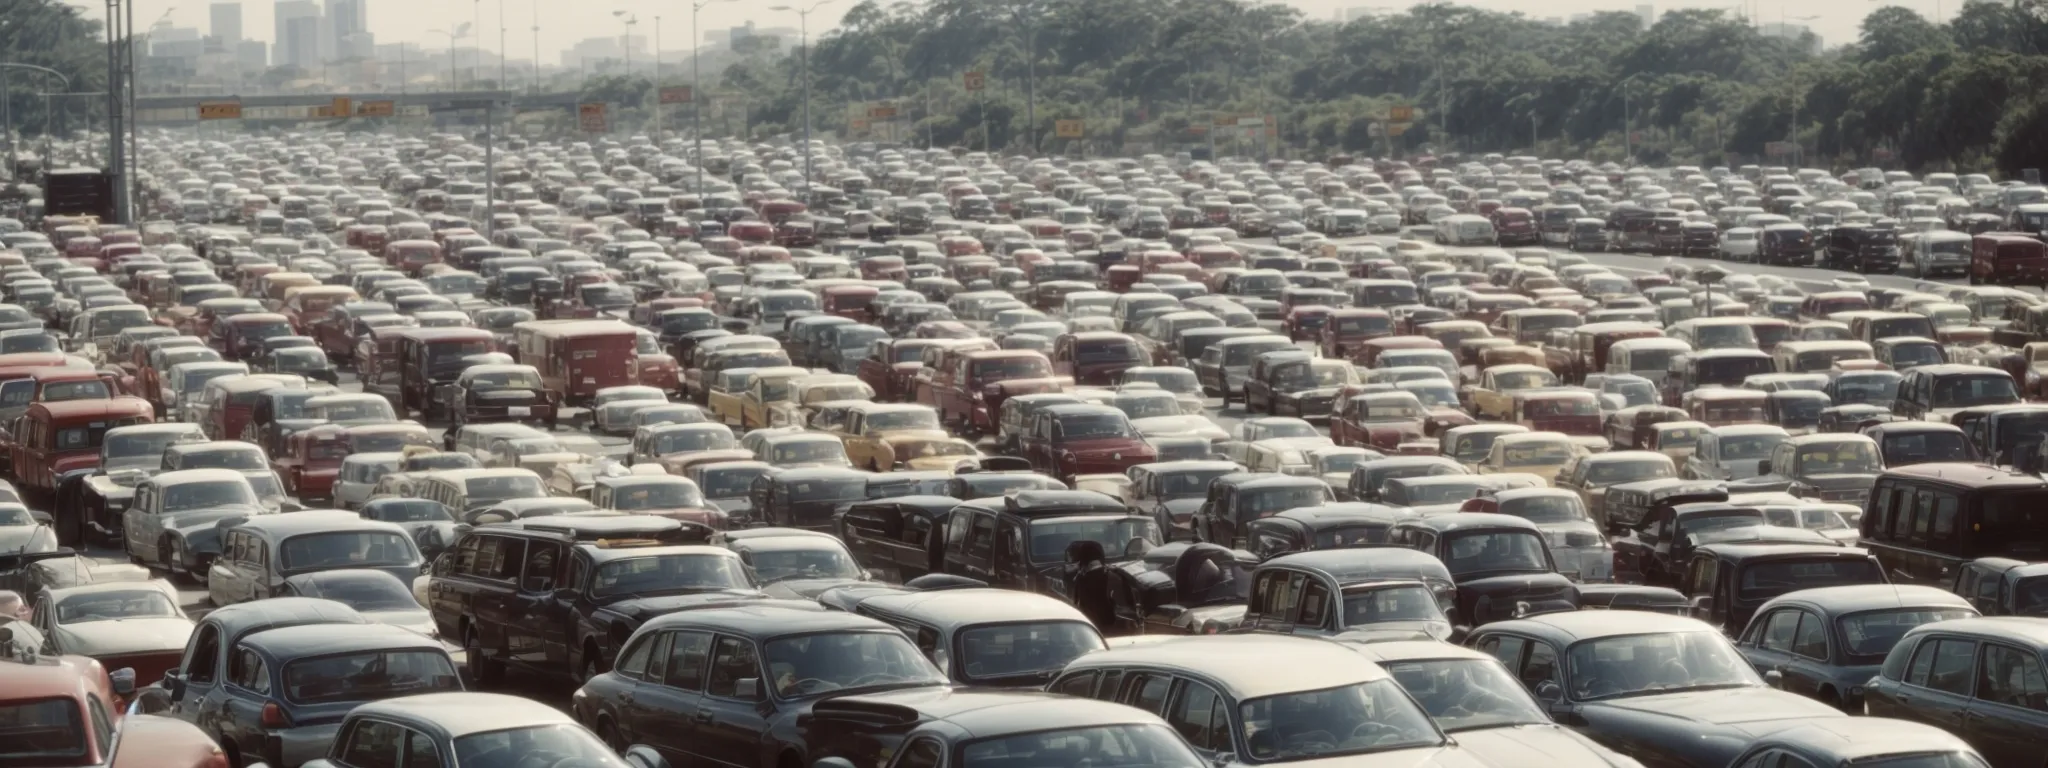 a congested highway full of stationary cars as shoppers rush to physical stores, analogous to increased online traffic.